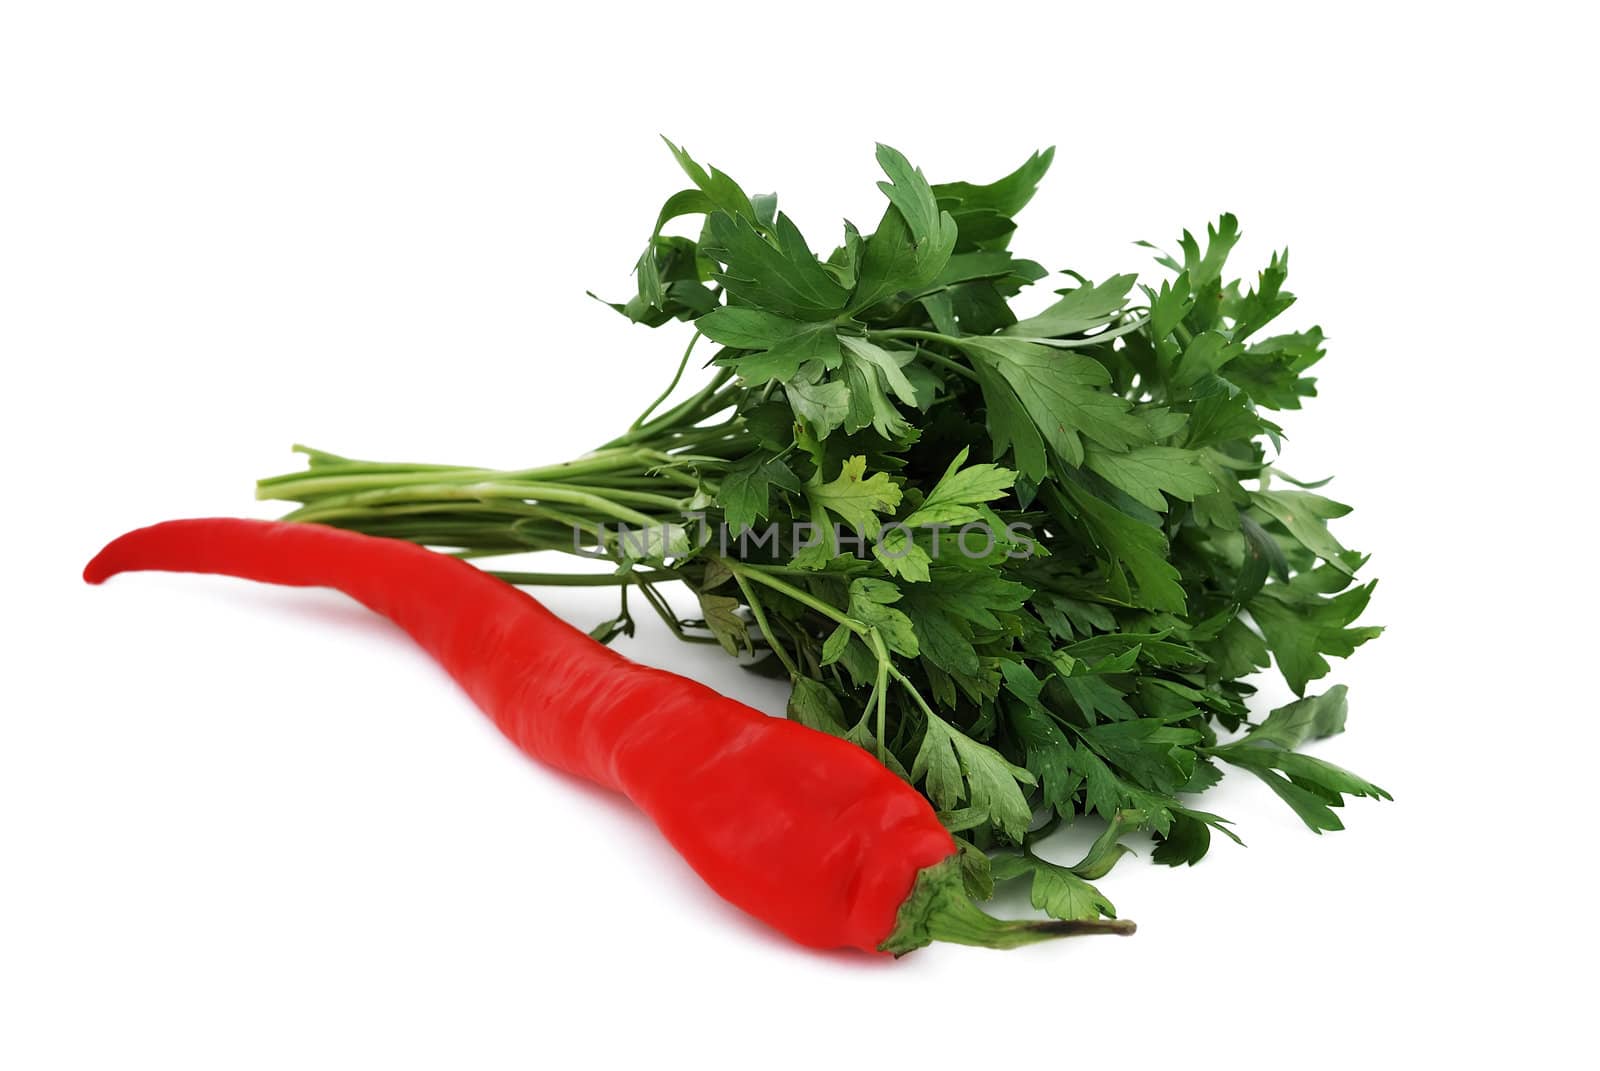 pepper and parsley on a white background